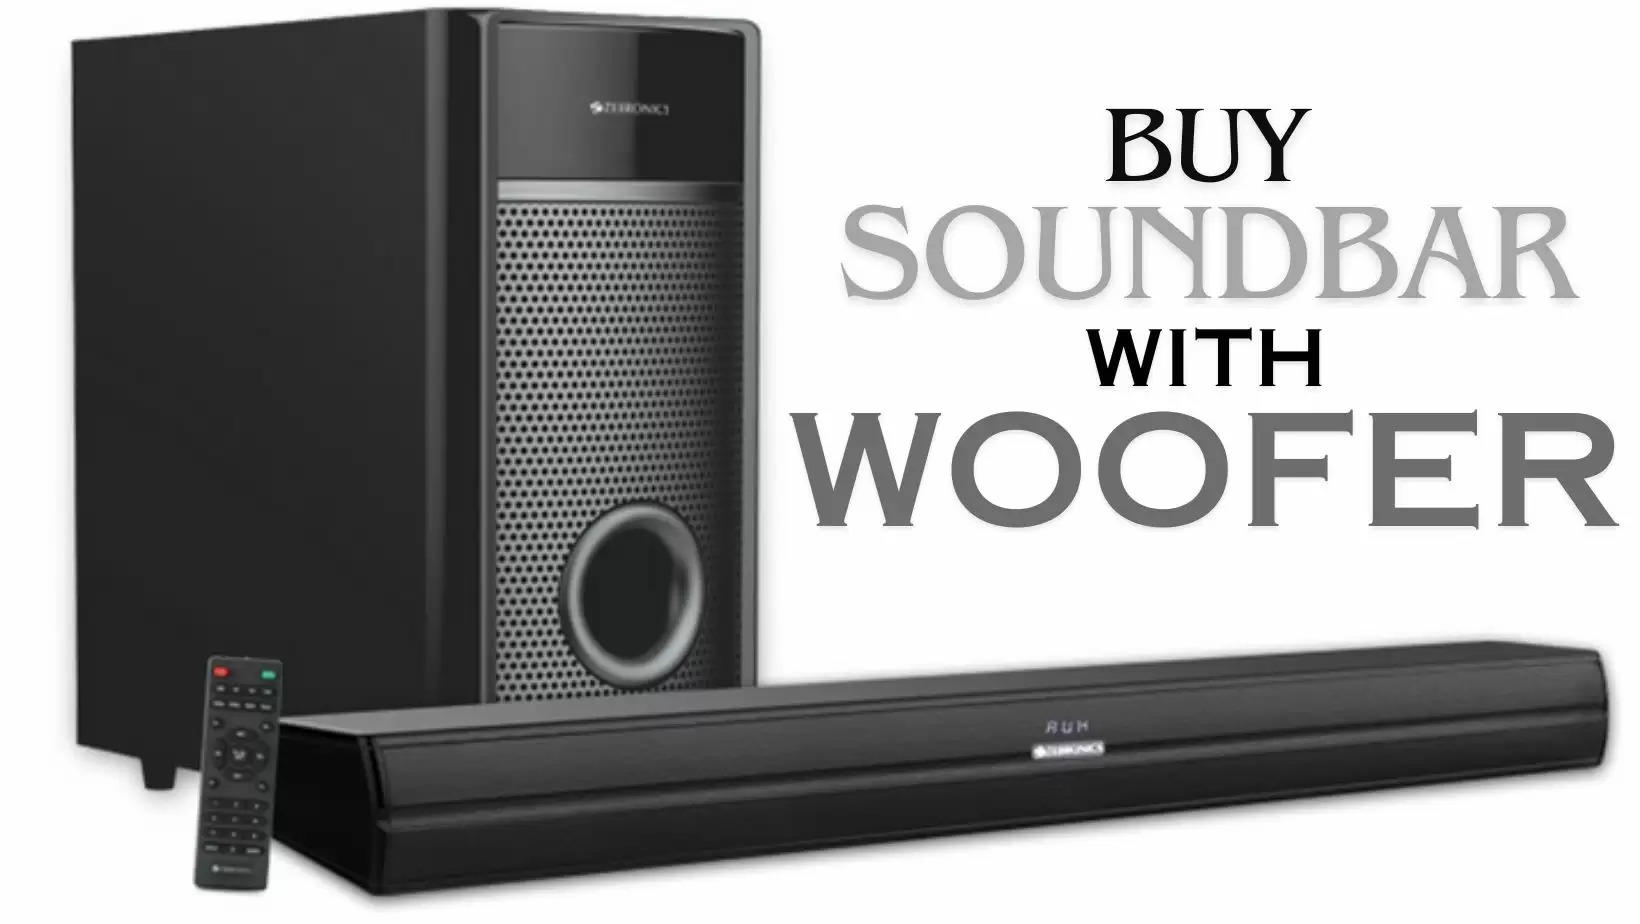 Reasons to buy a soundbar with a woofer